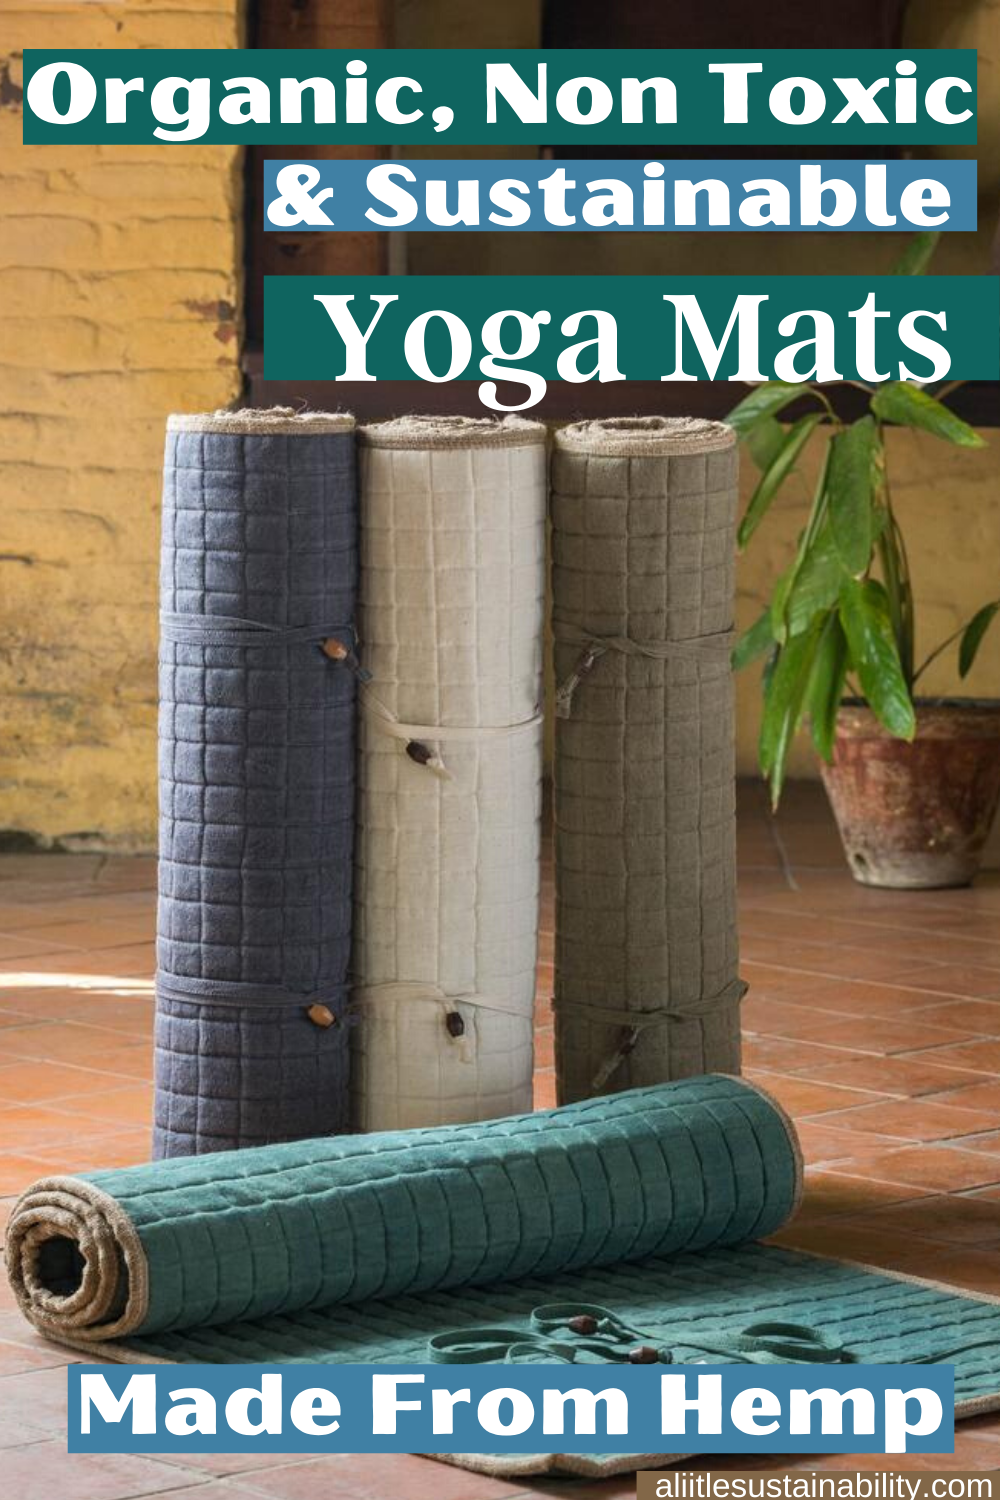 Hemp yoga mats are perfect for those living a zero waste lifestyle. Hemp yoga mats are non toxic and eco-friendly. These organic mats are ideal for gentle yoga practices, outdoor yoga, and yoga on carpet. Hemp is one of the most eco-friendly materials there are and you can get any of these yoga mats on Etsy. Learn more at www.alittlesustainability.com